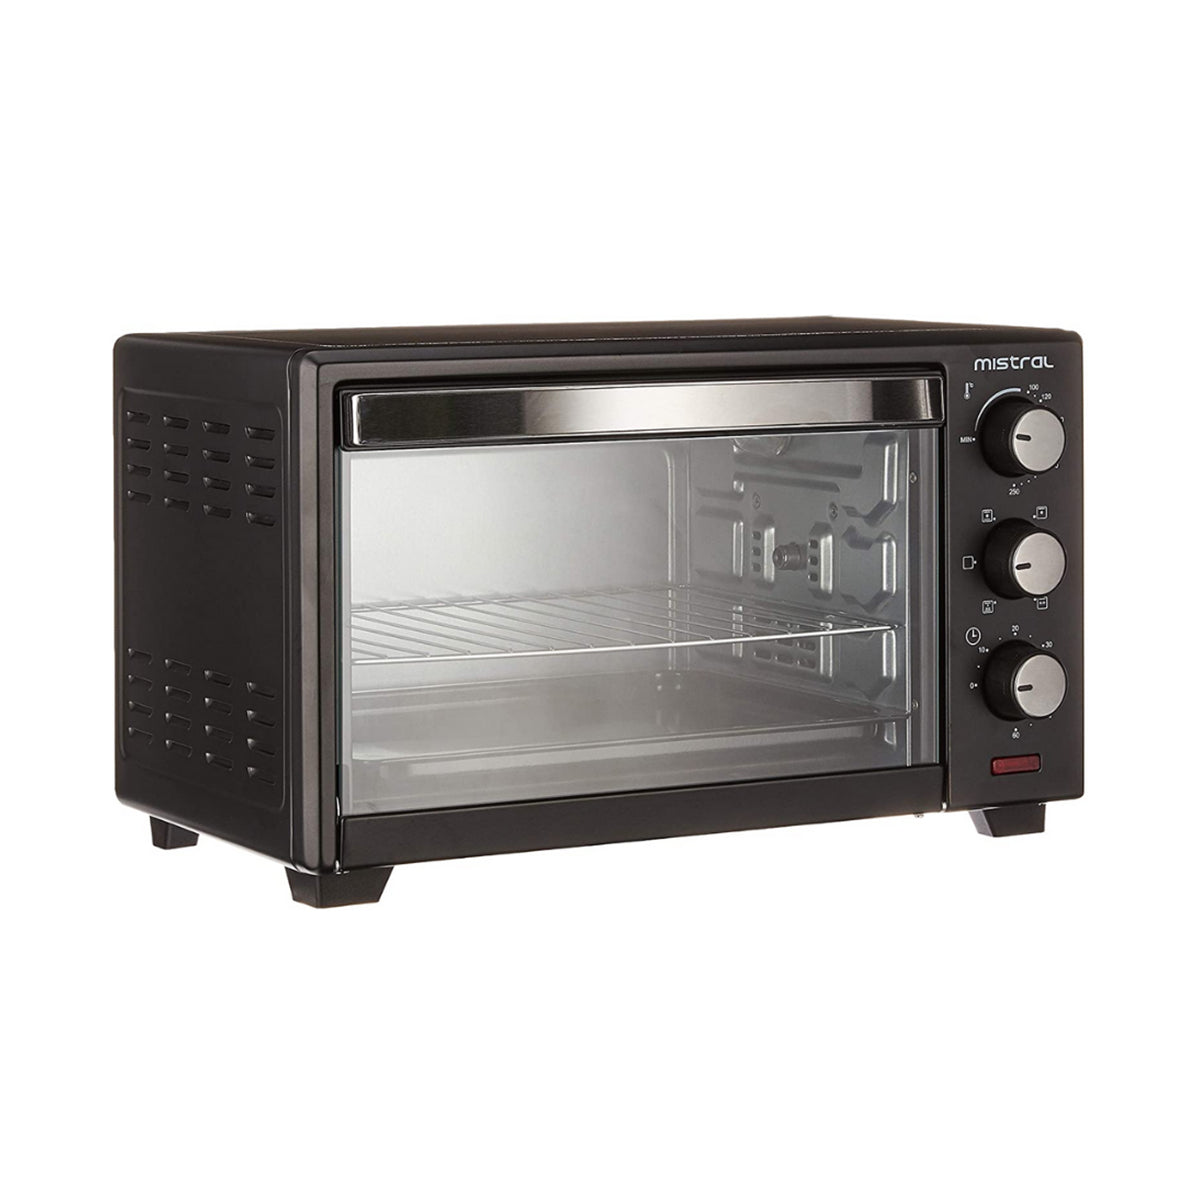 Mistral Electric Oven 20L